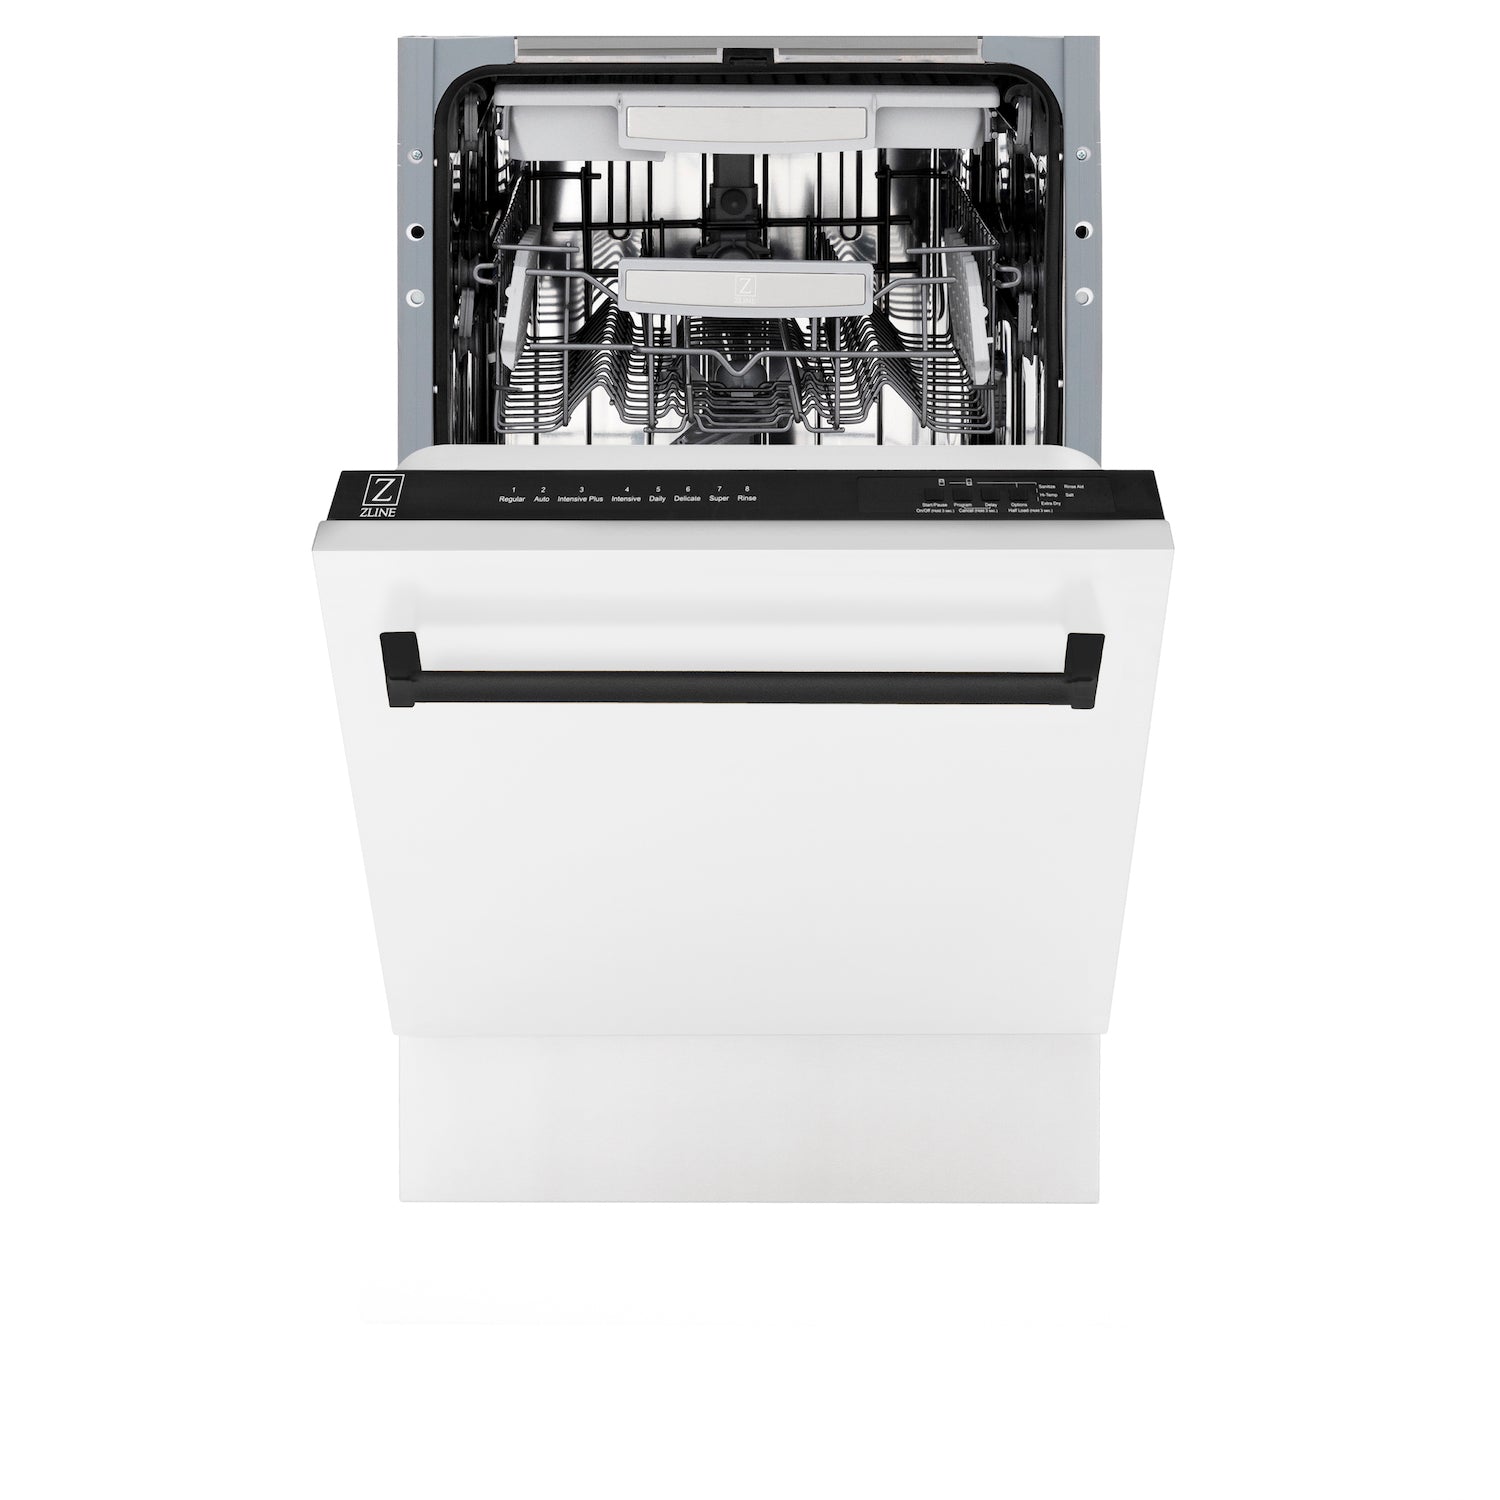 ZLINE Autograph Edition 18 in. Tallac Series 3rd Rack Top Control Built-In Dishwasher in White Matte with Matte Black Handle, 51dBa (DWVZ-WM-18-MB) front, half open.